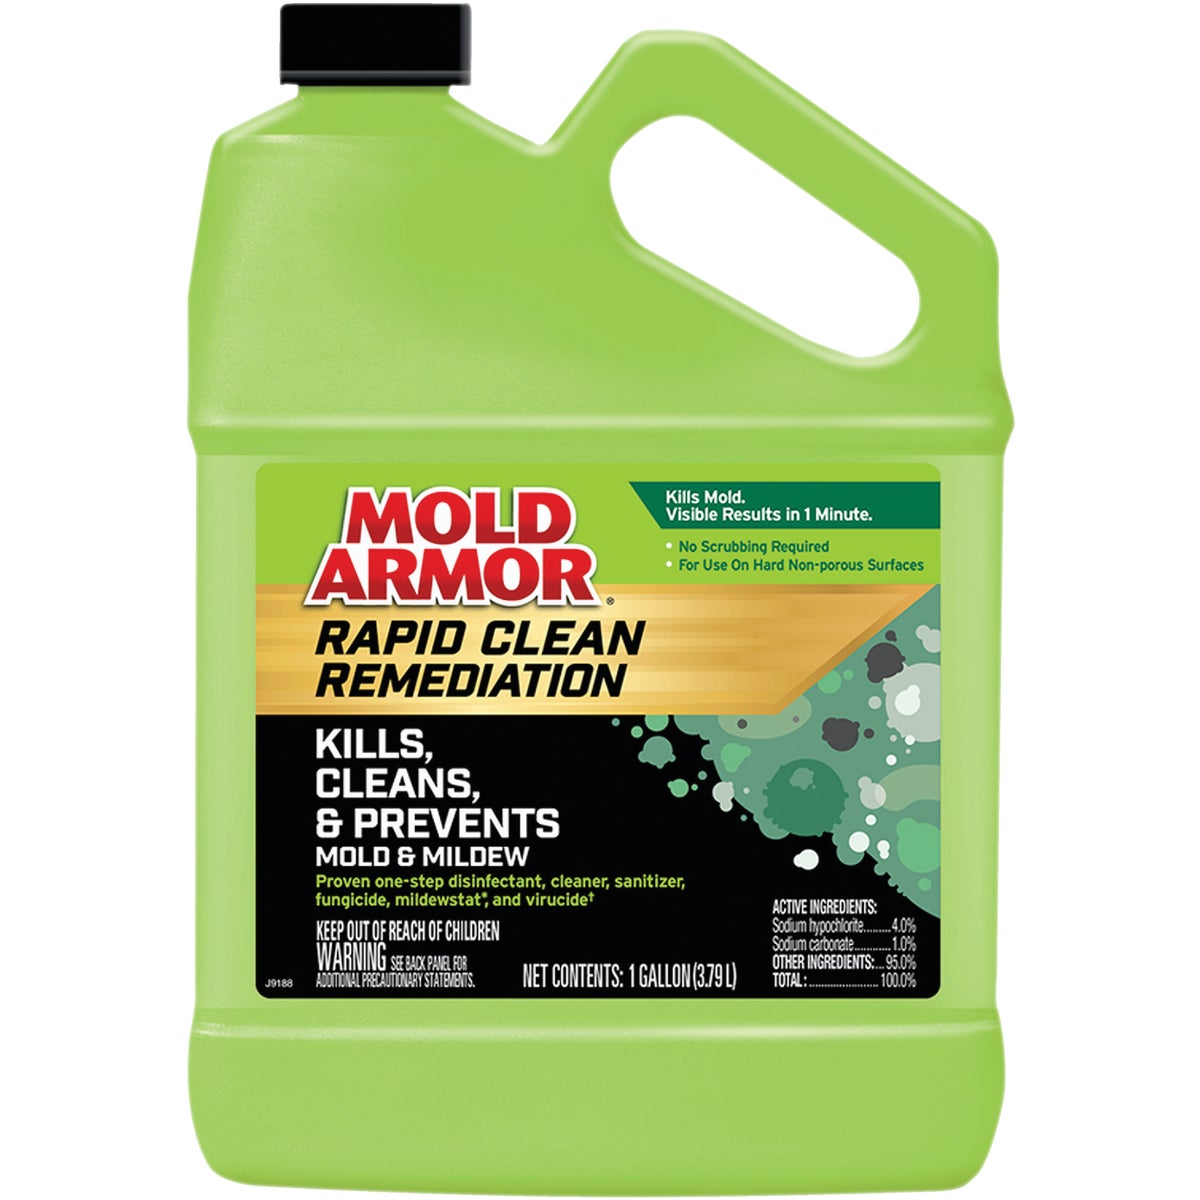 Mold Armor Rapid Clean Remediation 1 Gal. Mold Remover